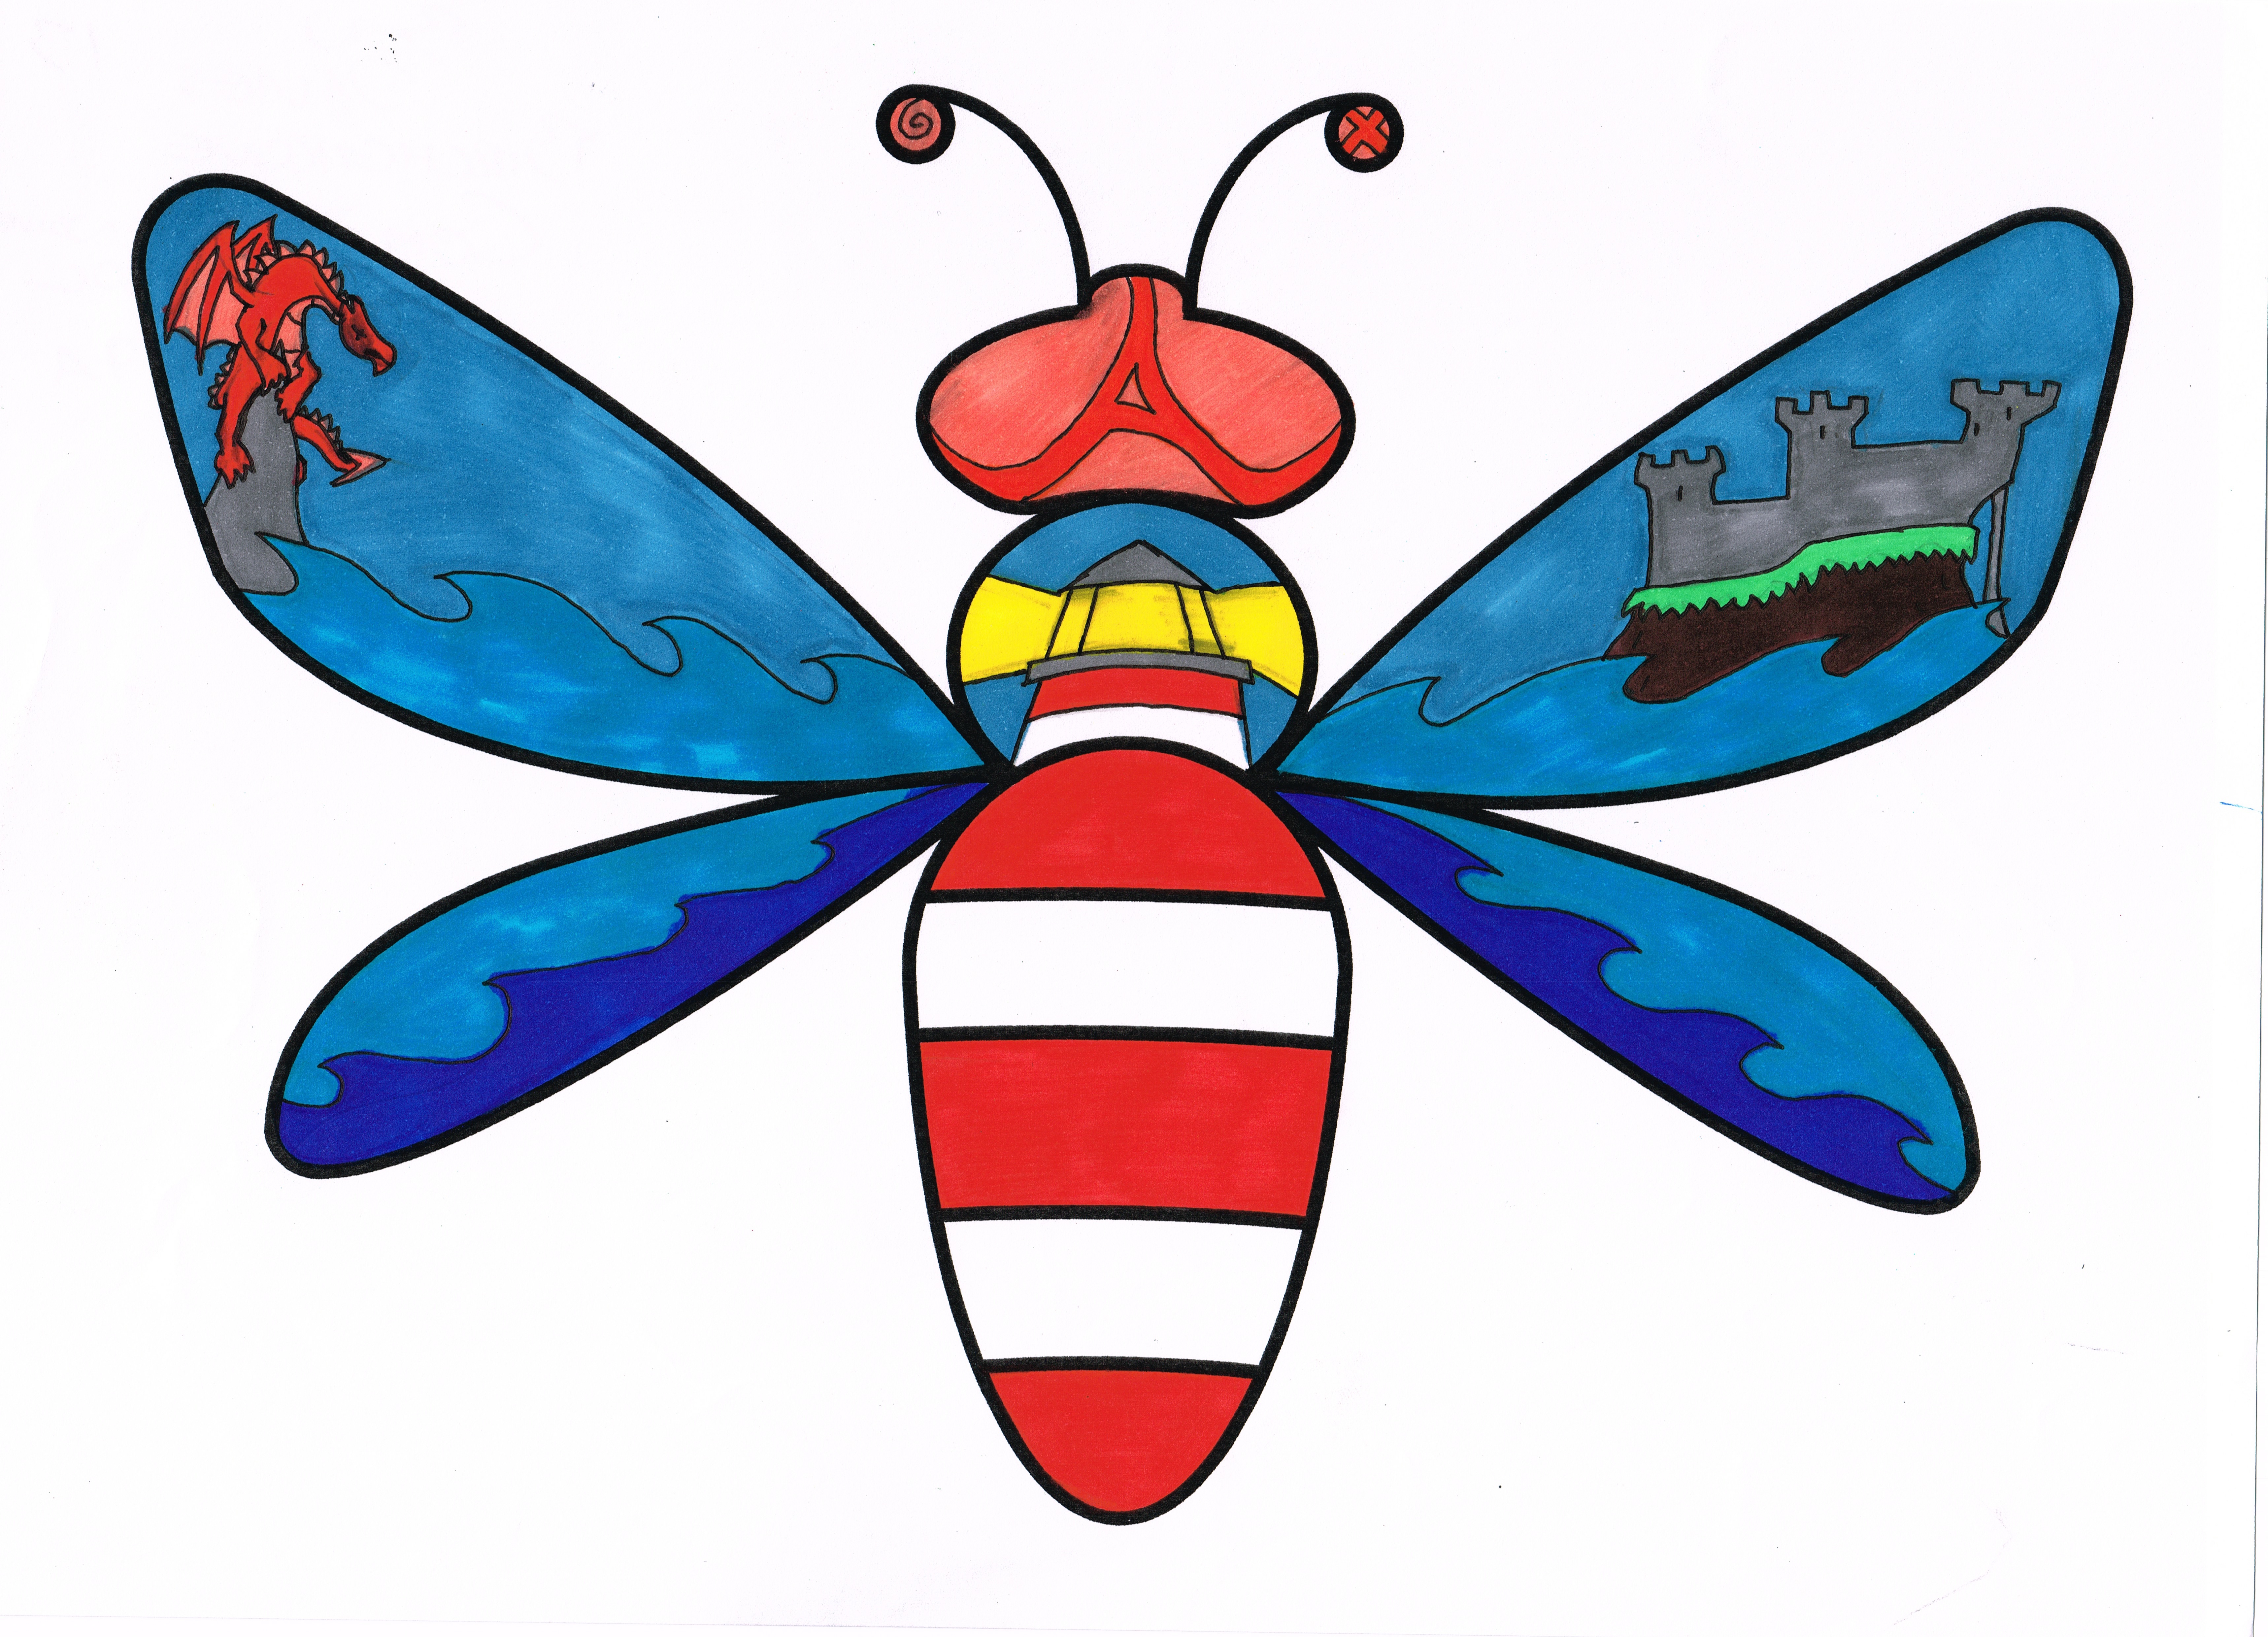 Illustrated image from Locws International's Morriston Hospital Schools Mural Project of bee showing a lighthouse as the bees body and waves on the wings.